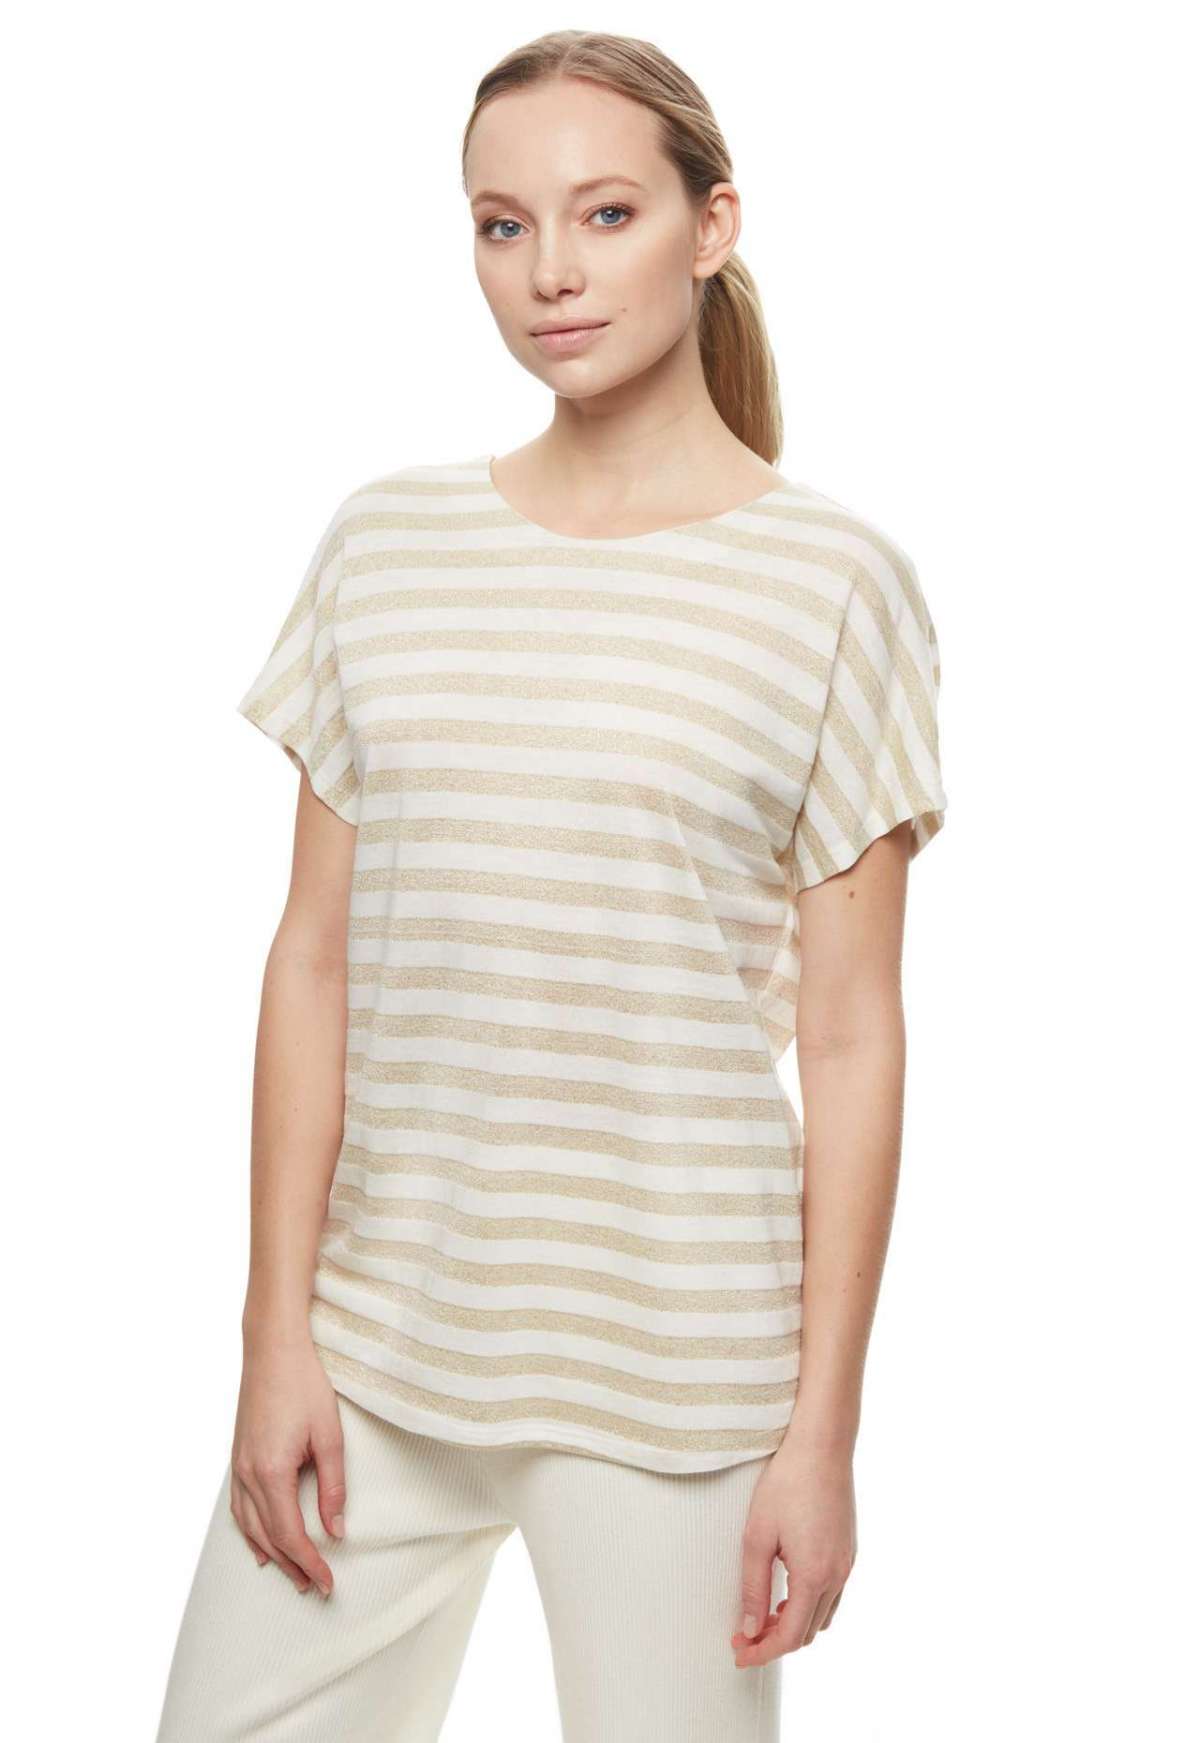 T-shirt Stefanel a righe in lurex a 69 euro